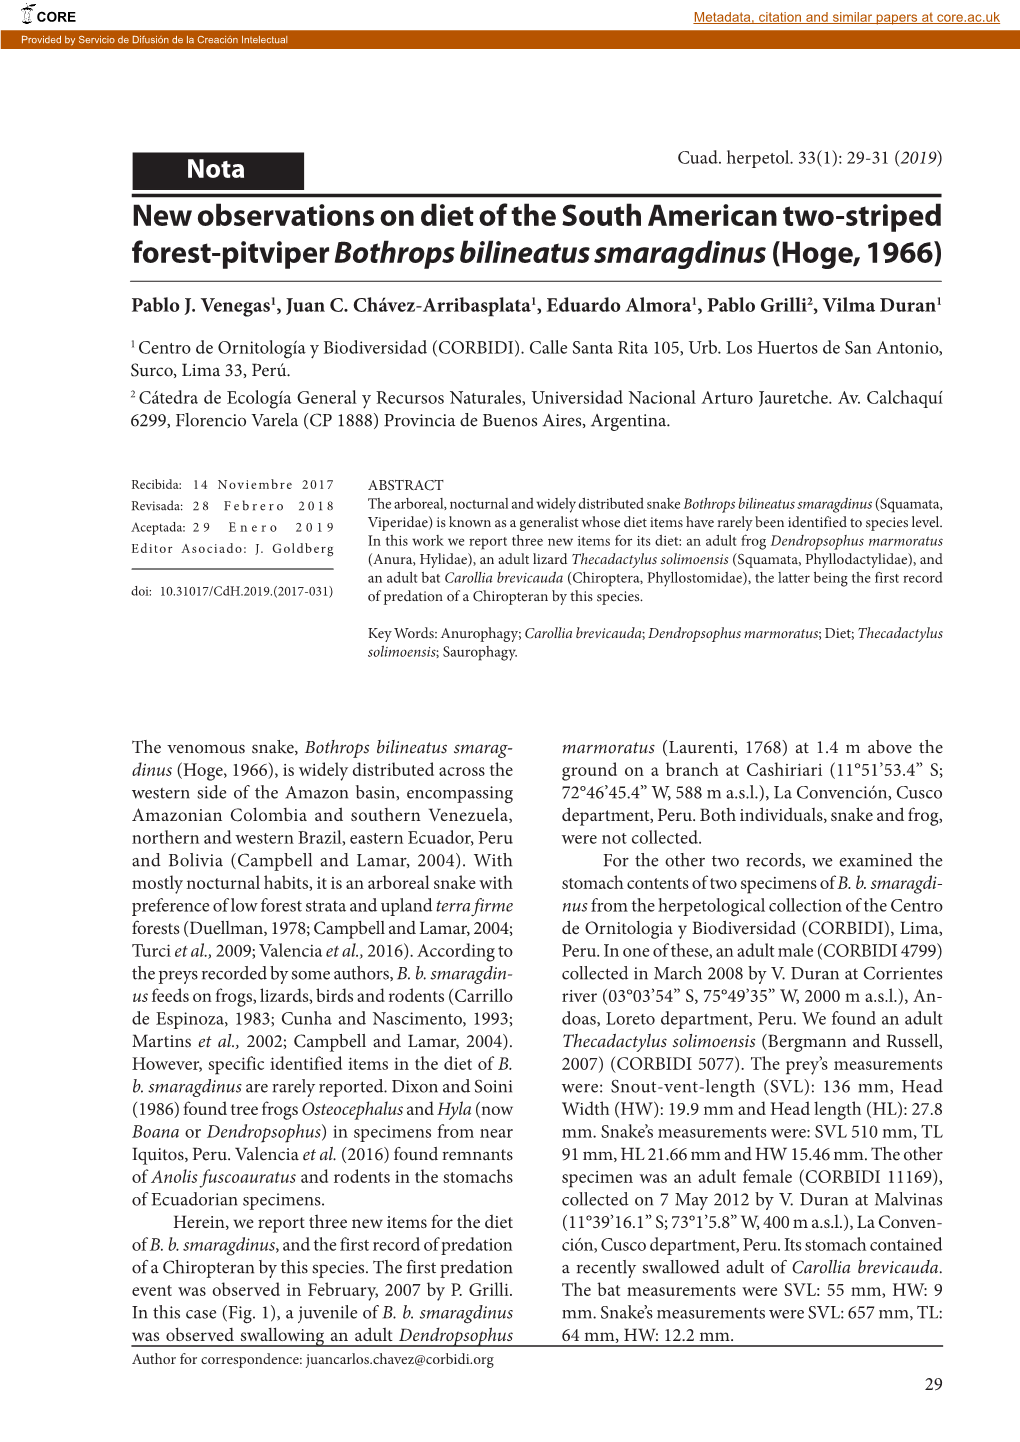 New Observations on Diet of the South American Two-Striped Forest-Pitviper Bothrops Bilineatus Smaragdinus (Hoge, 1966)